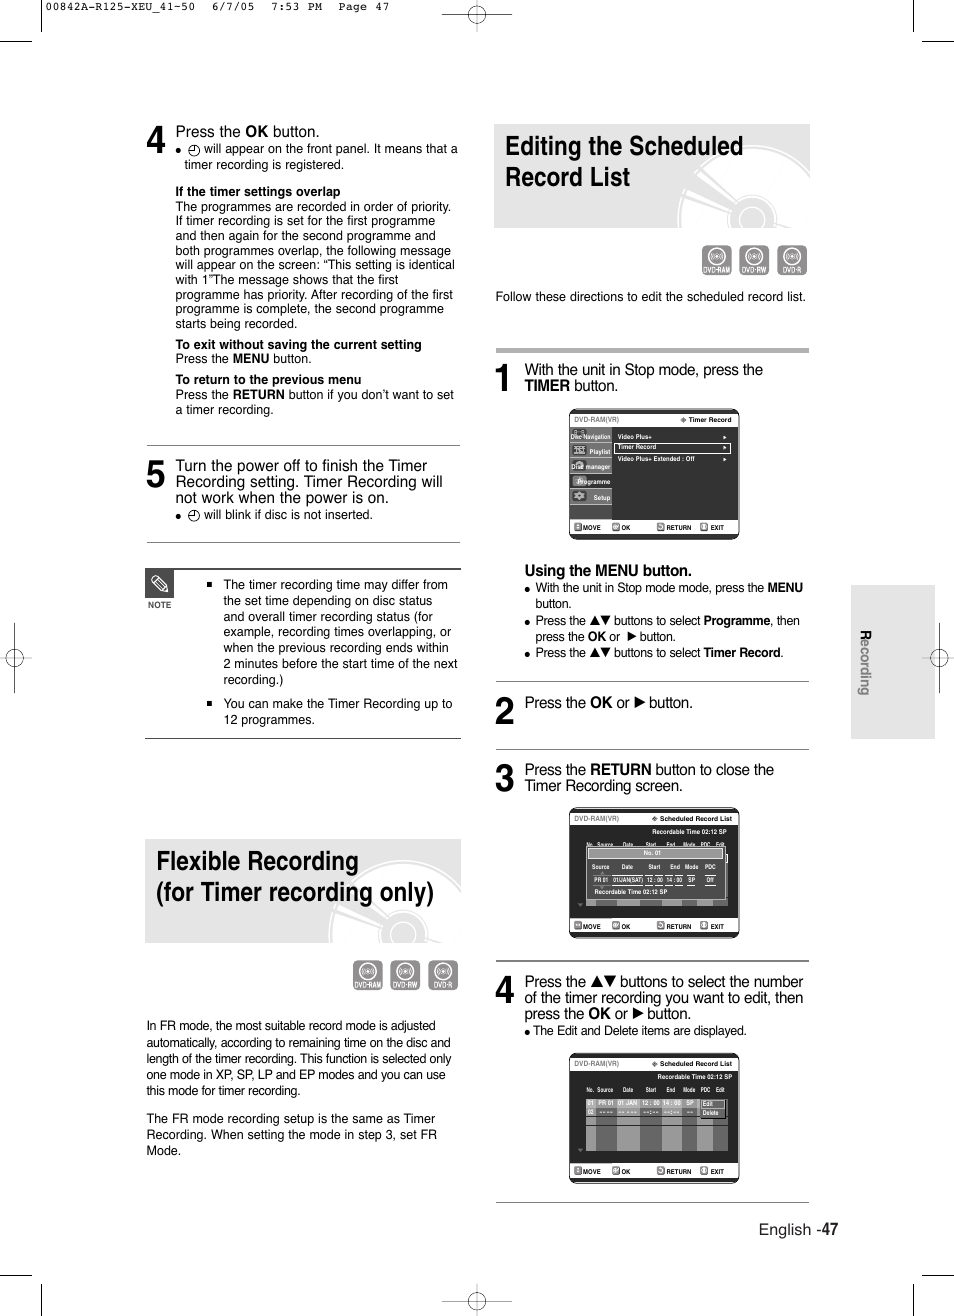 Flexible recording (for timer recording only), Editing the scheduled record  list, English | Samsung DVD-R125 User Manual | Page 47 / 93 | Original mode